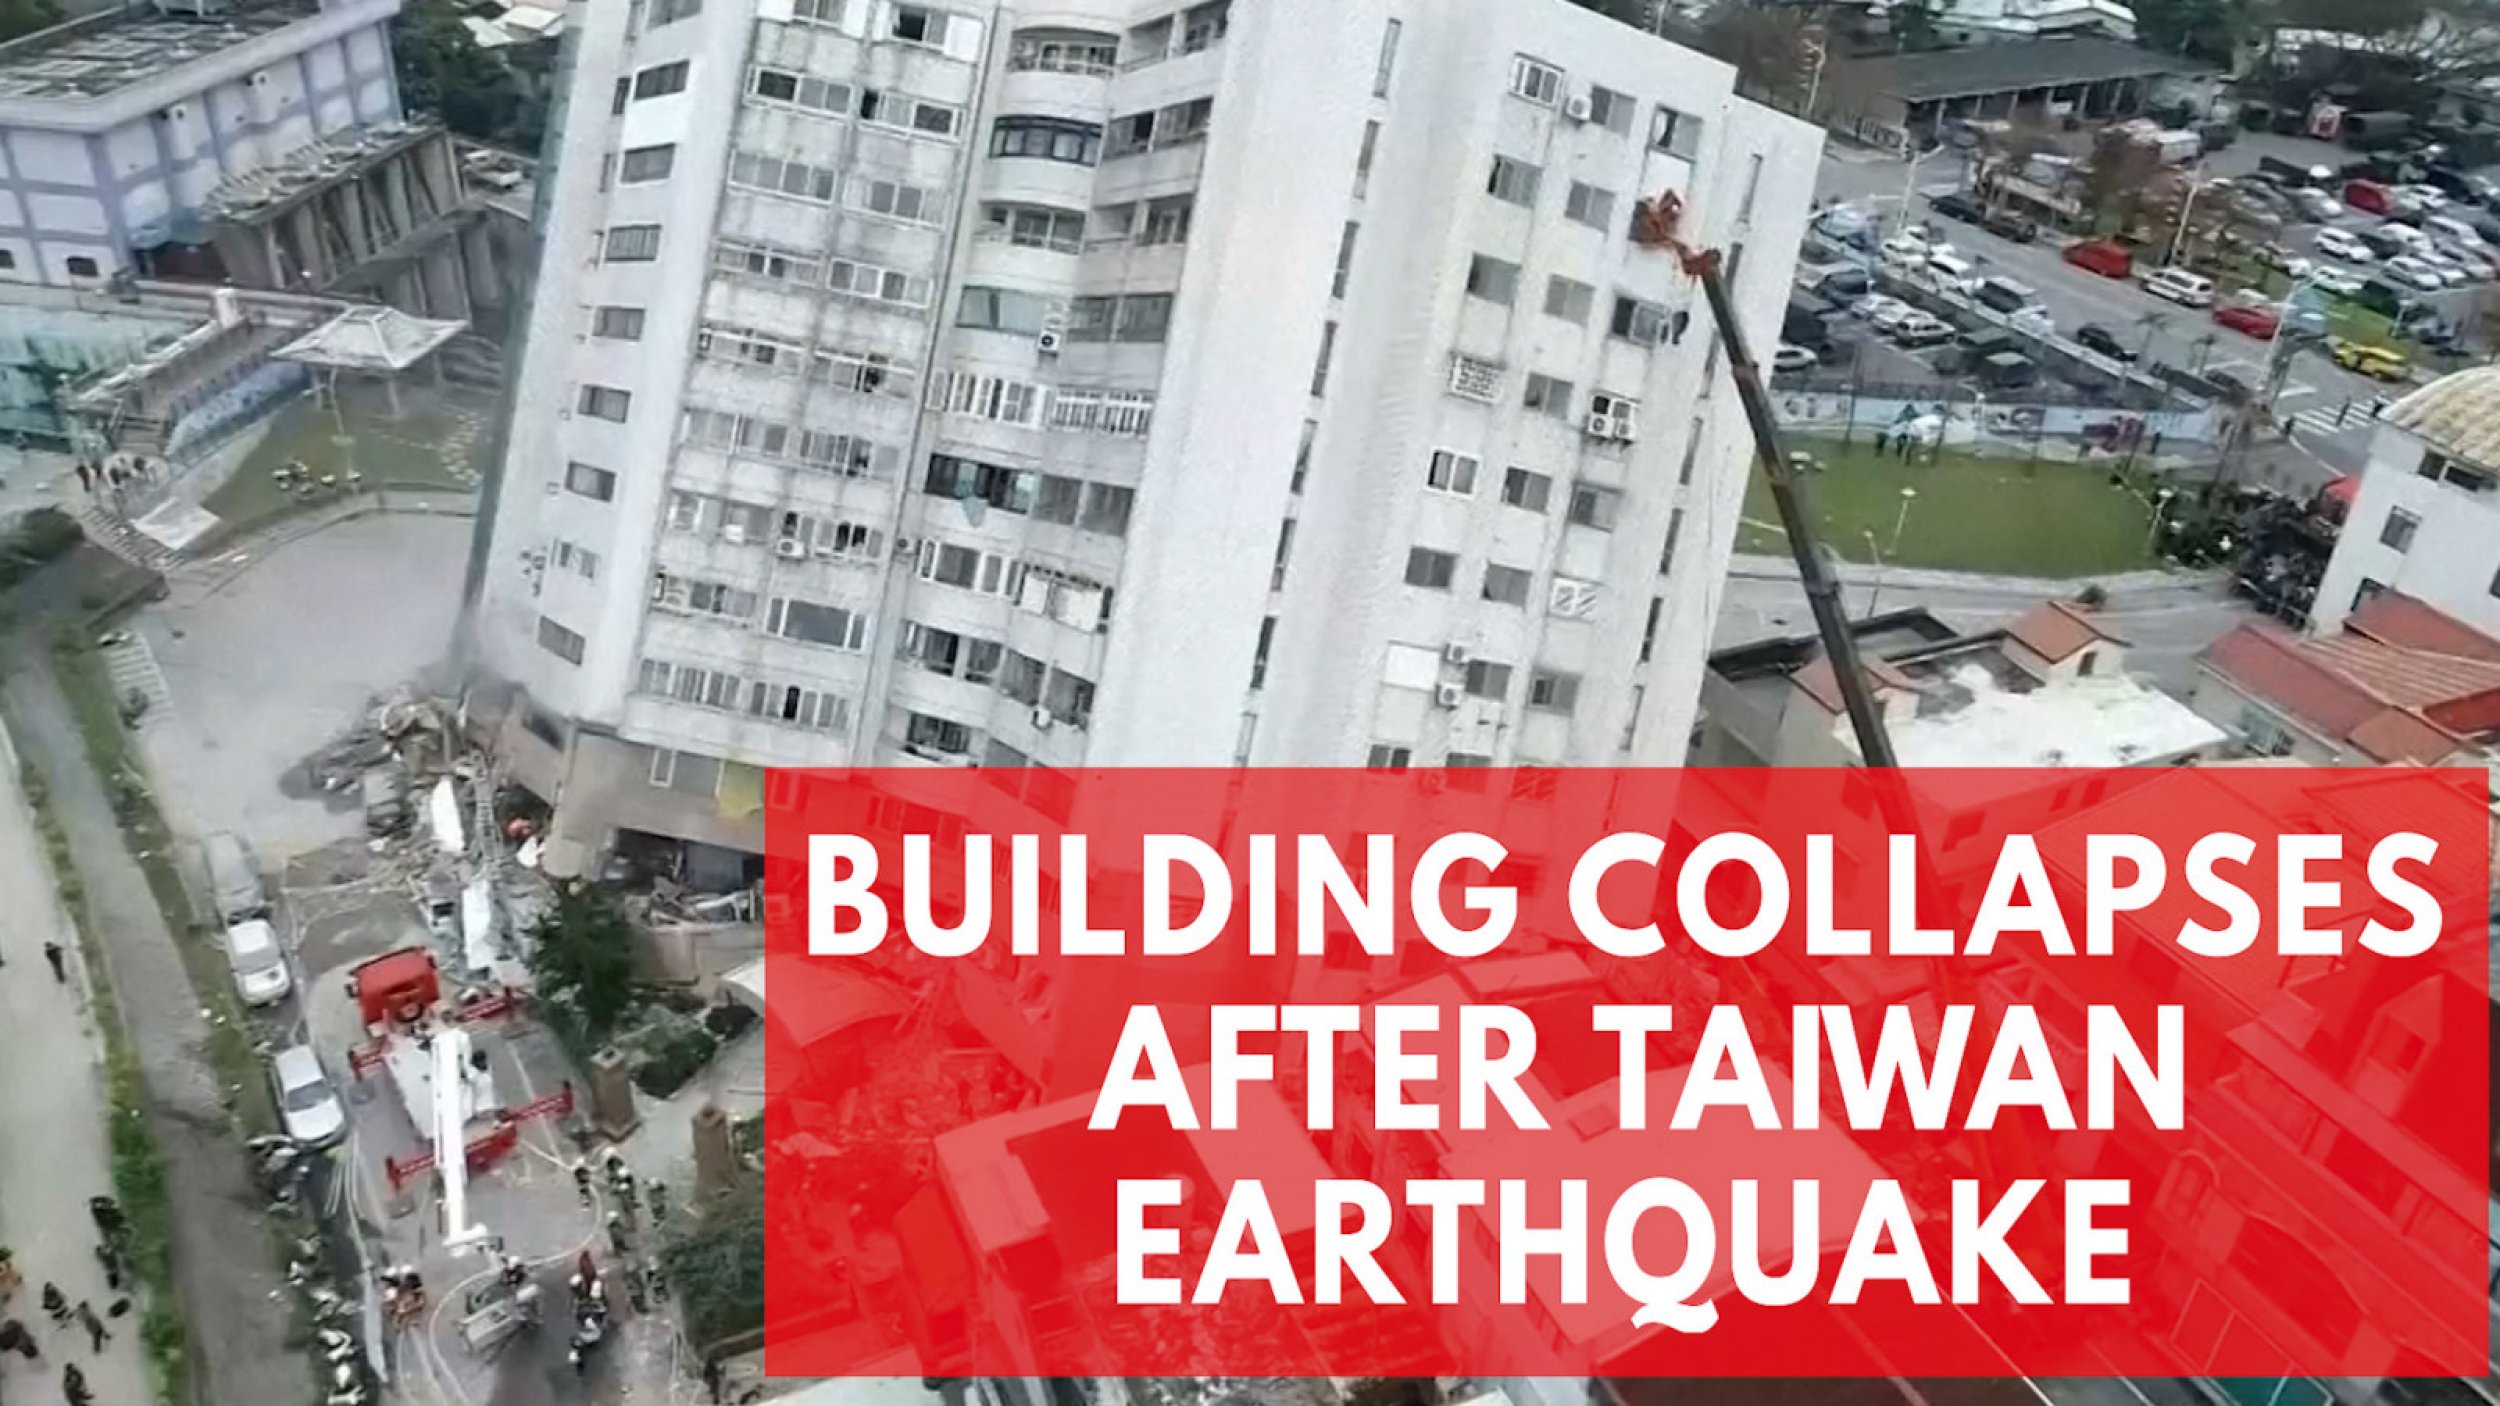 Drone Footage Shows Collapsed Residential Building After Taiwan Earthquake